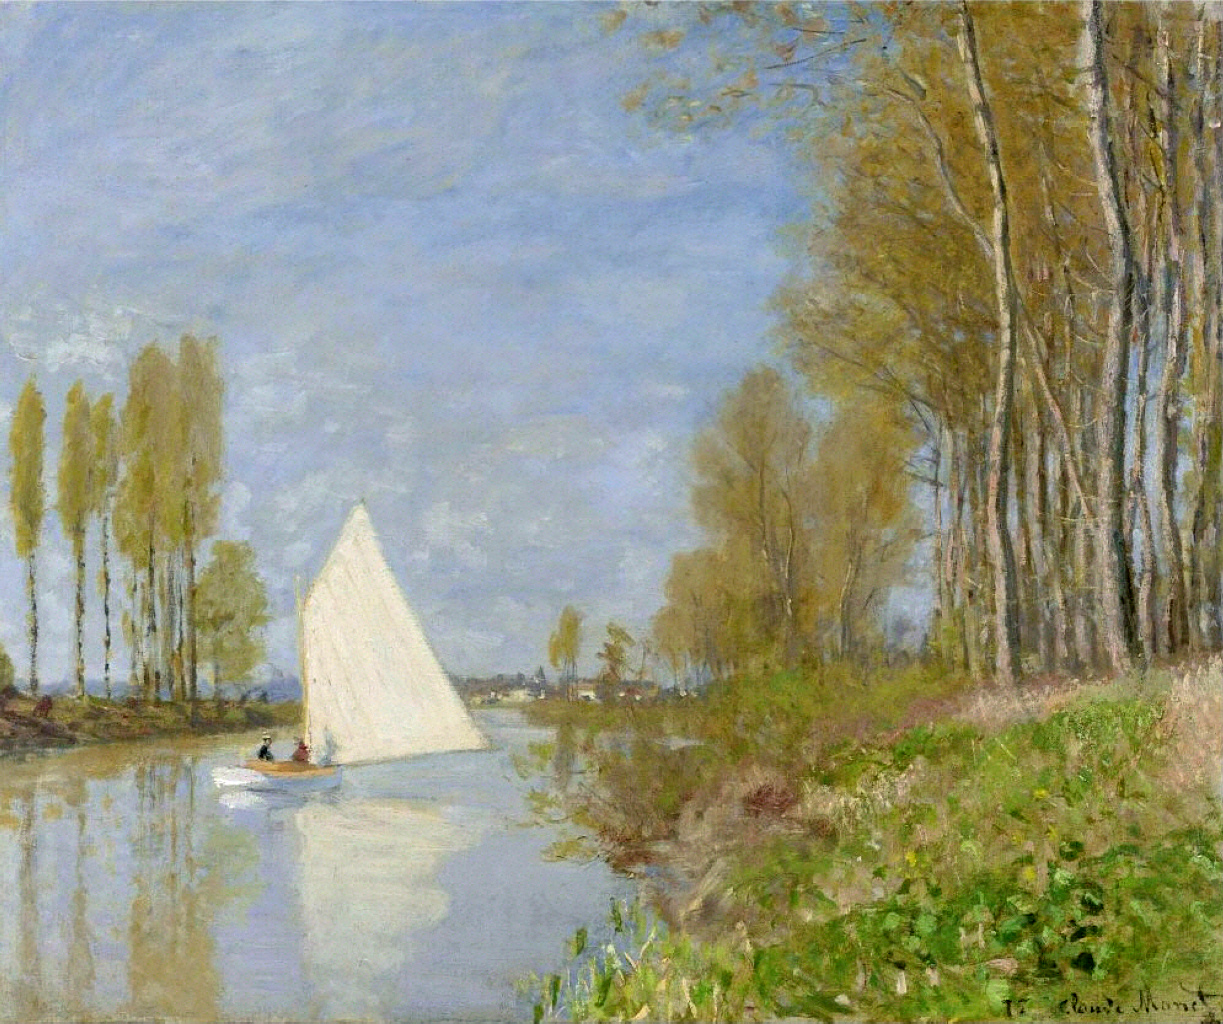 Small Boat on the Small Branch of the Seine at Argenteuil 1872